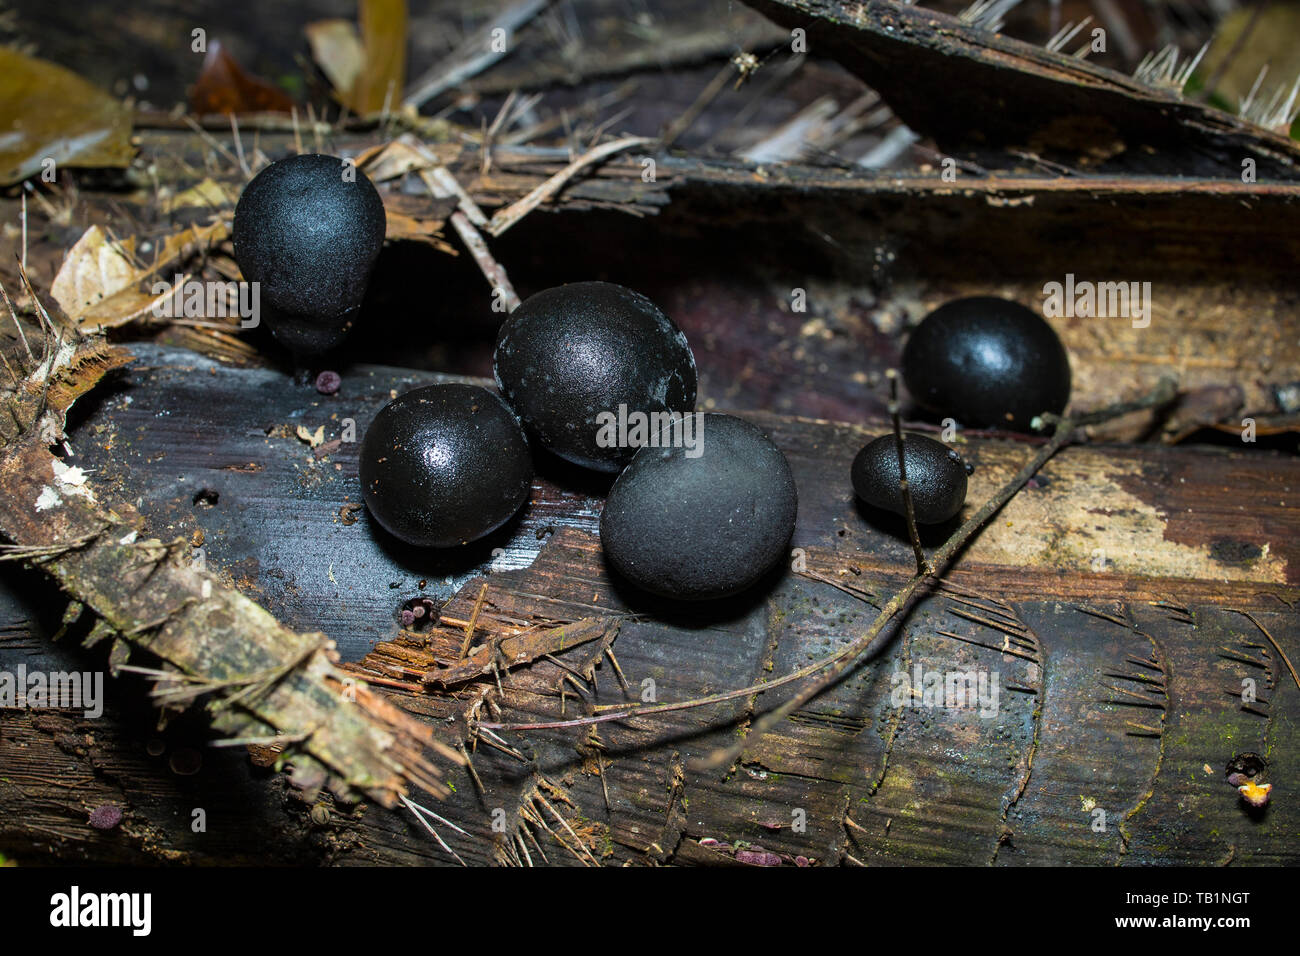 Black round mushrooms growing on a dead tree trunk inside a Malaysian tropical rainforest Stock Photo